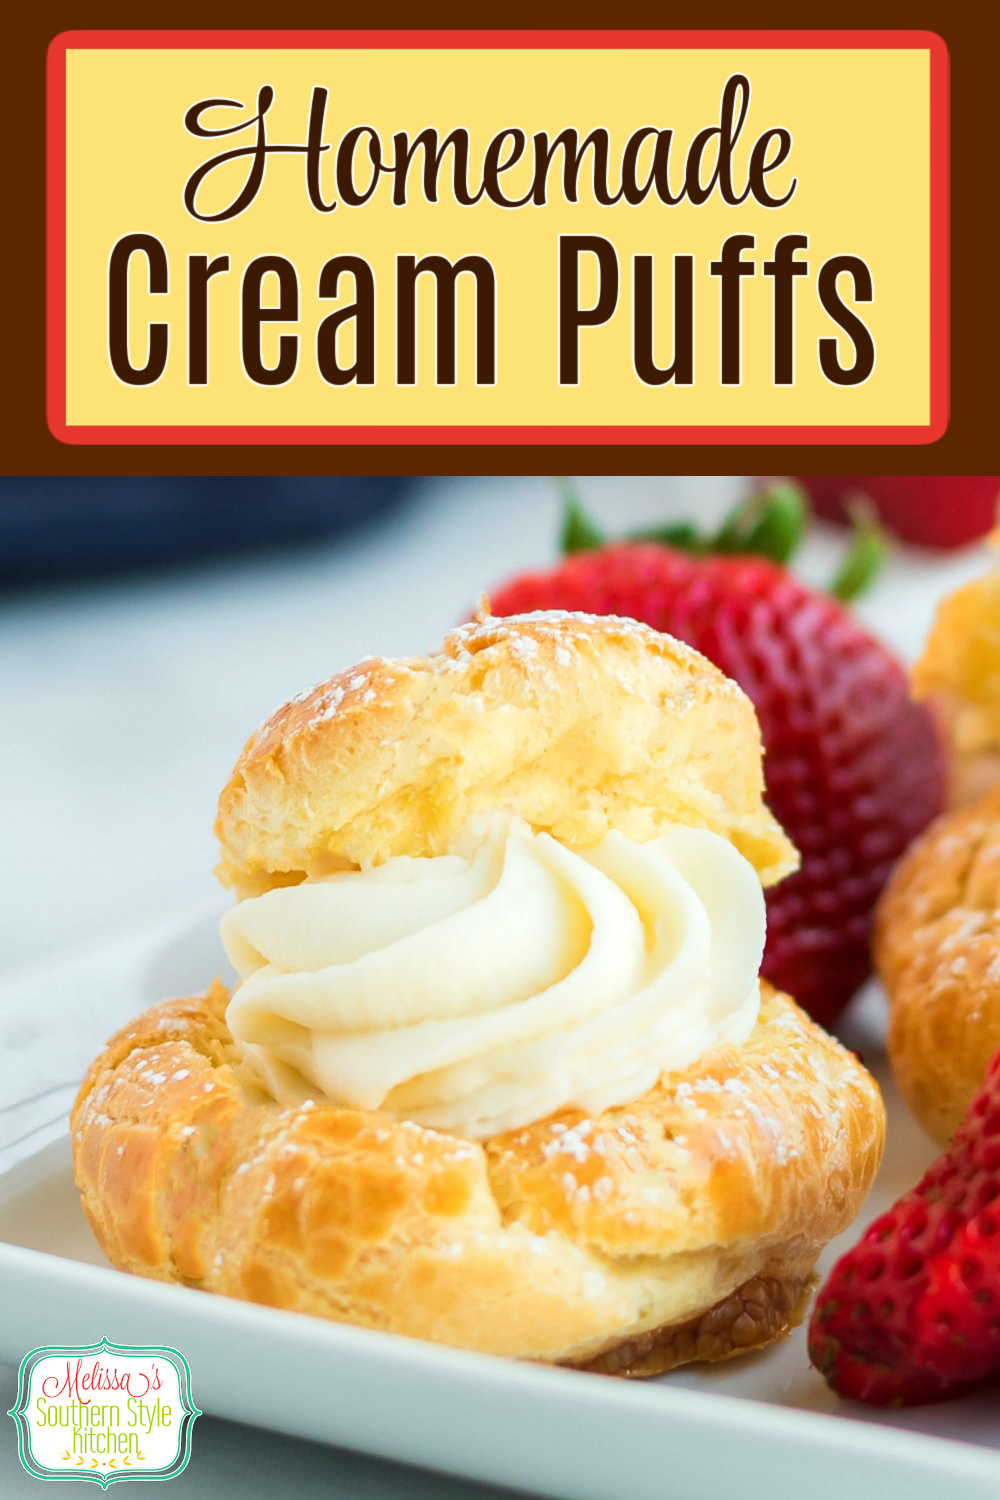 These glorious and delicious Cream Puffs will make a stunning addition to your special occasion desserts menu. #creampuffs #puffs #pateachoux #chouzdough #pastries #pastrycreamrecipes #bestcreampuffs #holidaybaking #hnolidaydesserts #dessertfoodrecipes #southernfood #southernrecipes via @melissasssk